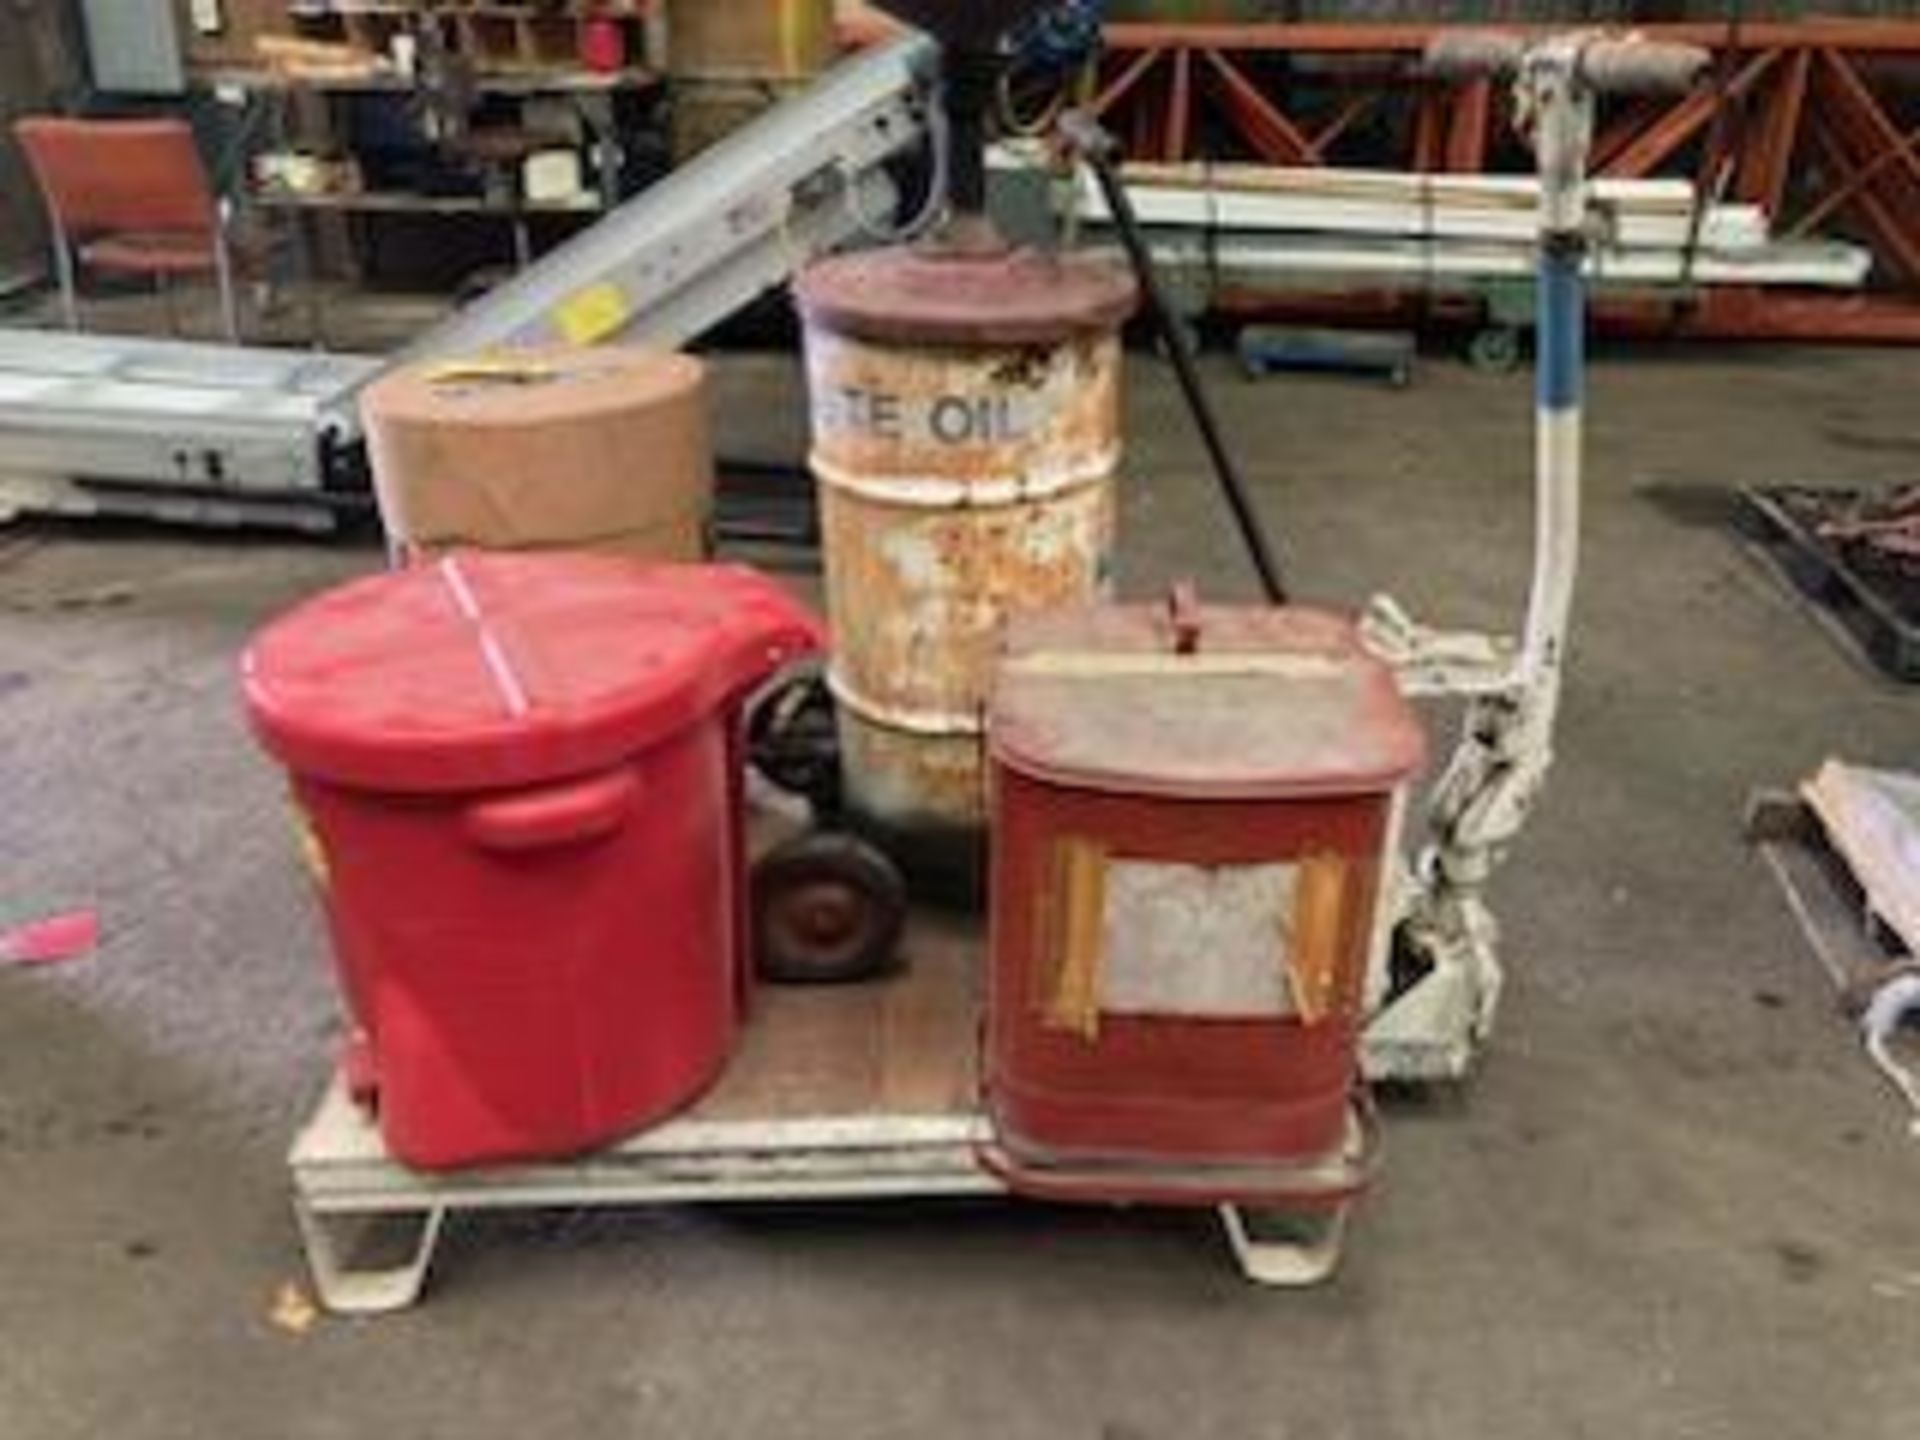 Waste Oil Containers on HD Platform Jack (Location: 279 Burrows St., Rochester, NY 14606)